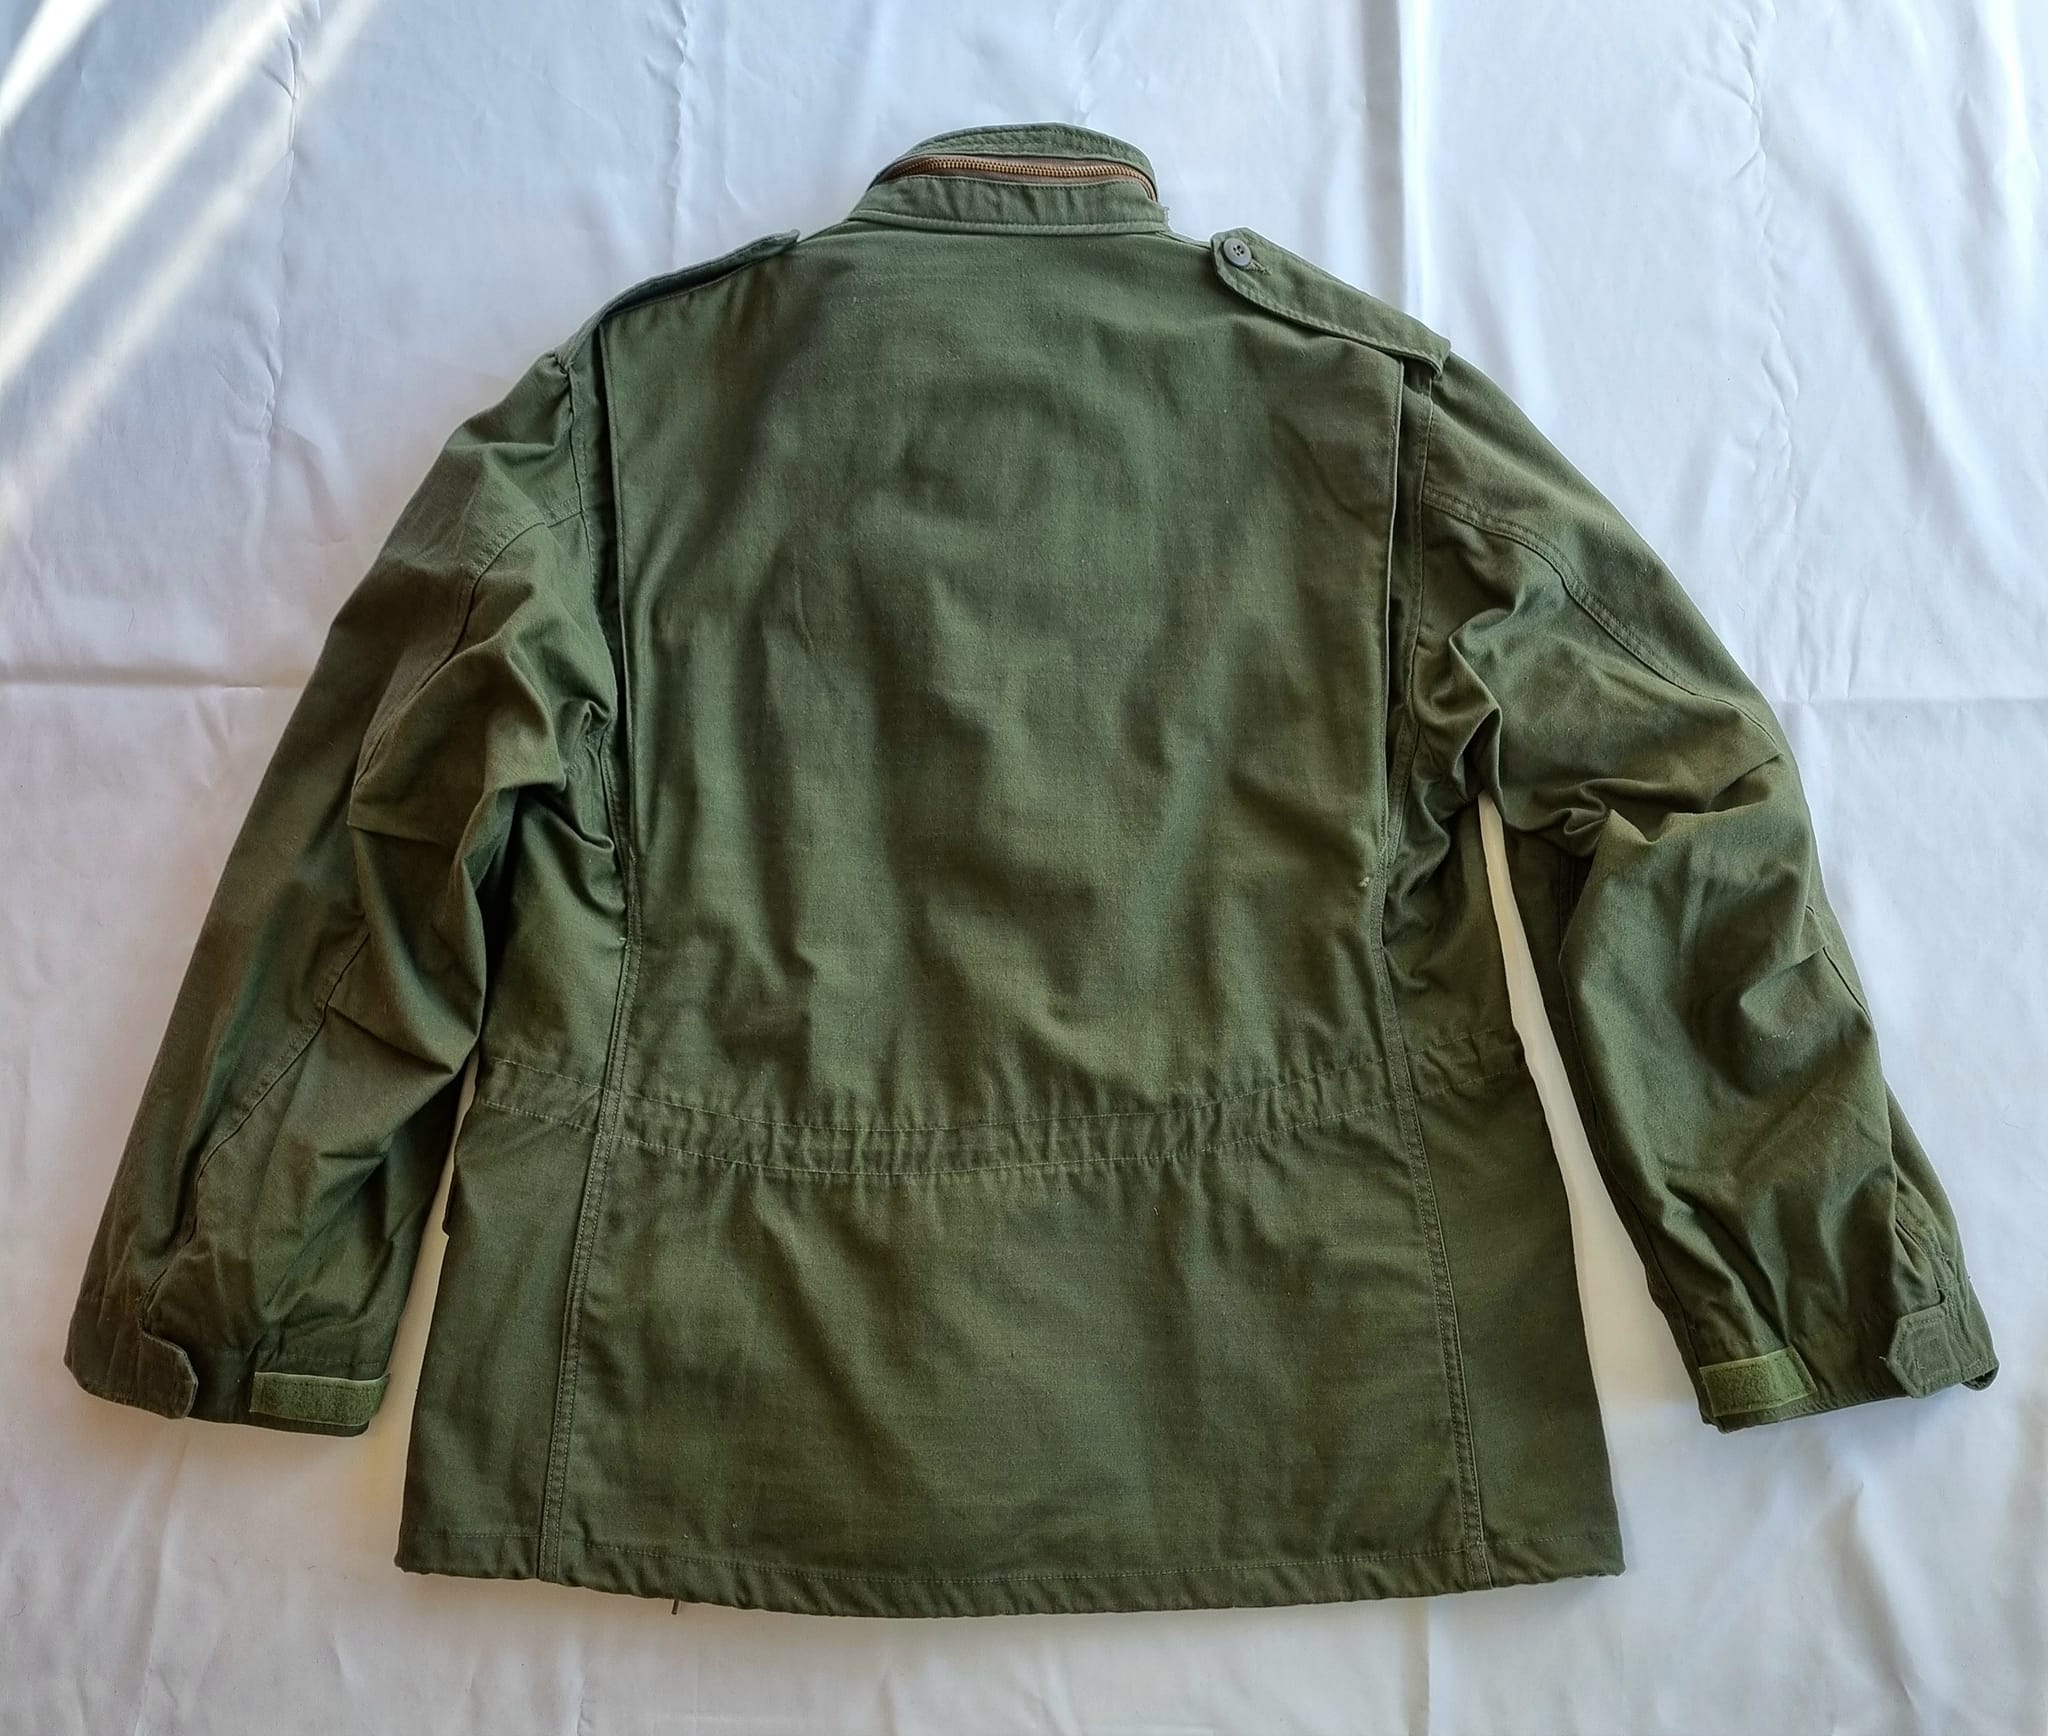 Giacca Militare Verde Field Jacket M65 Vintage '80 - PXPrato